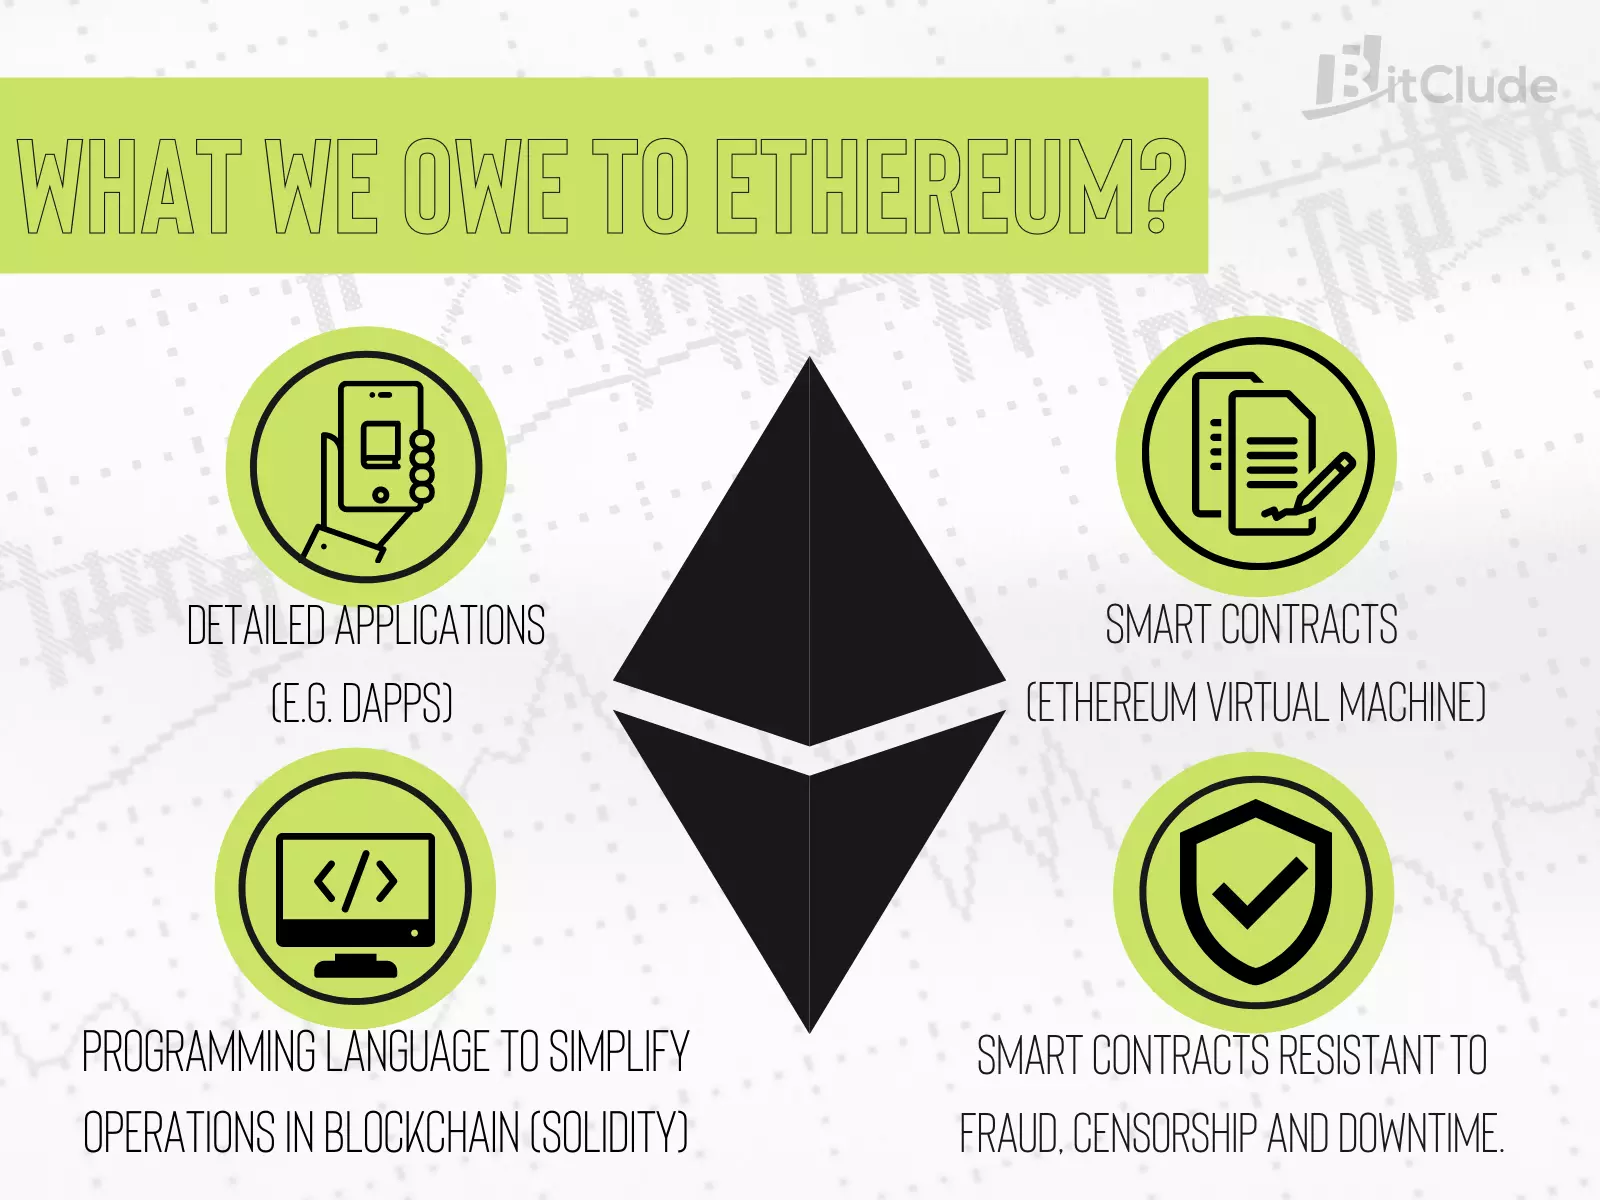 What we owe to ethereum